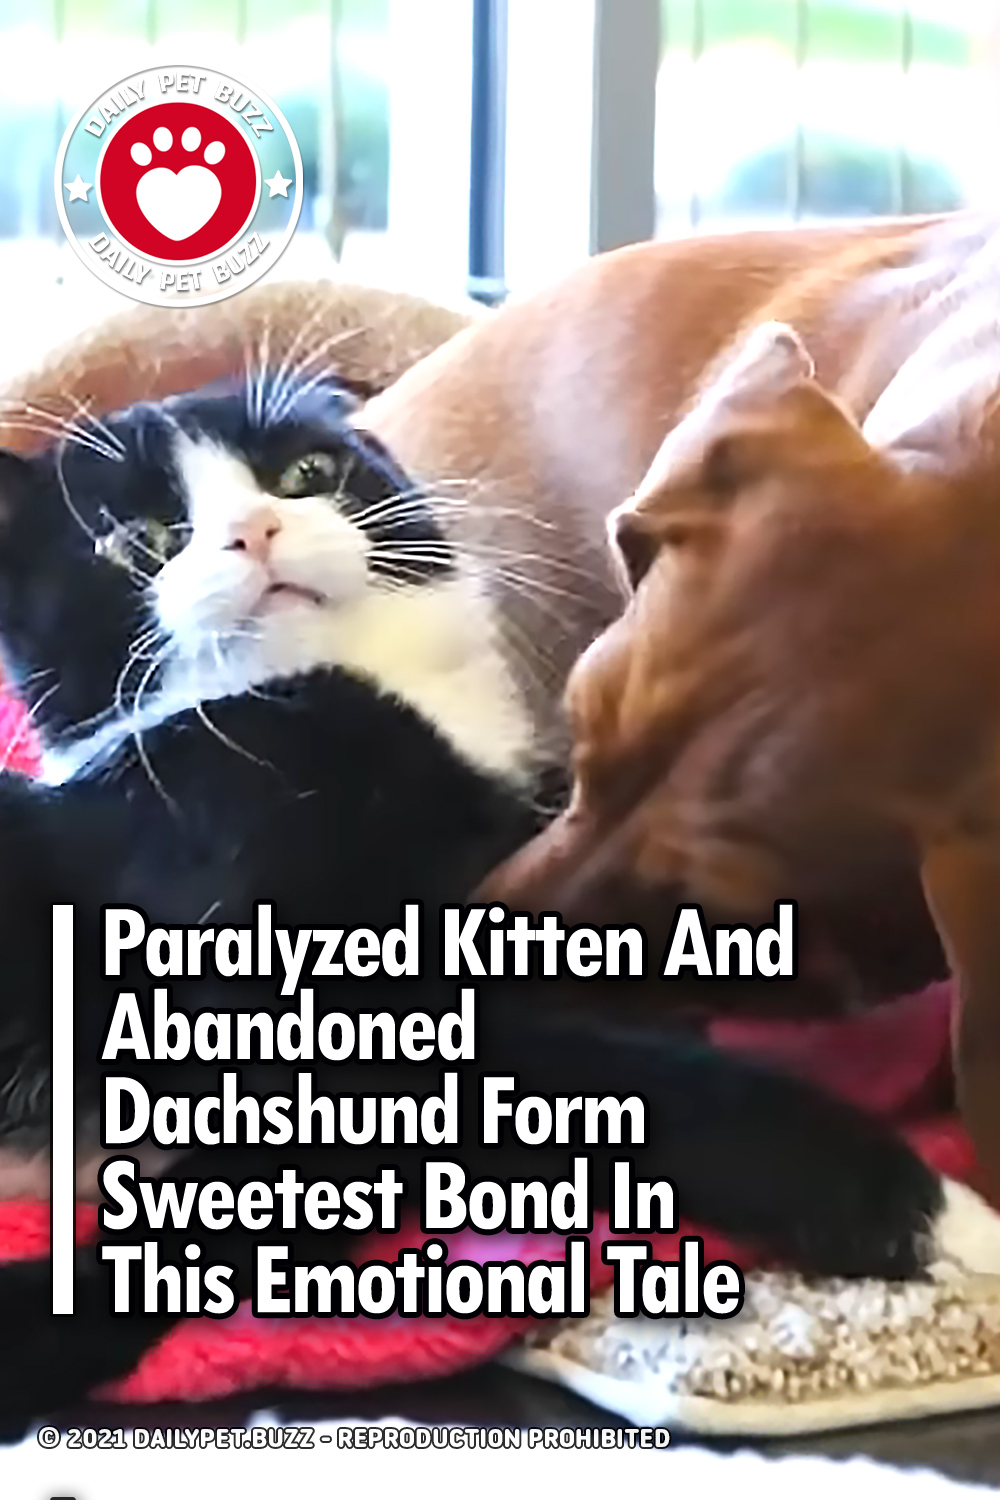 Paralyzed Kitten And Abandoned Dachshund Form Sweetest Bond In This Emotional Tale